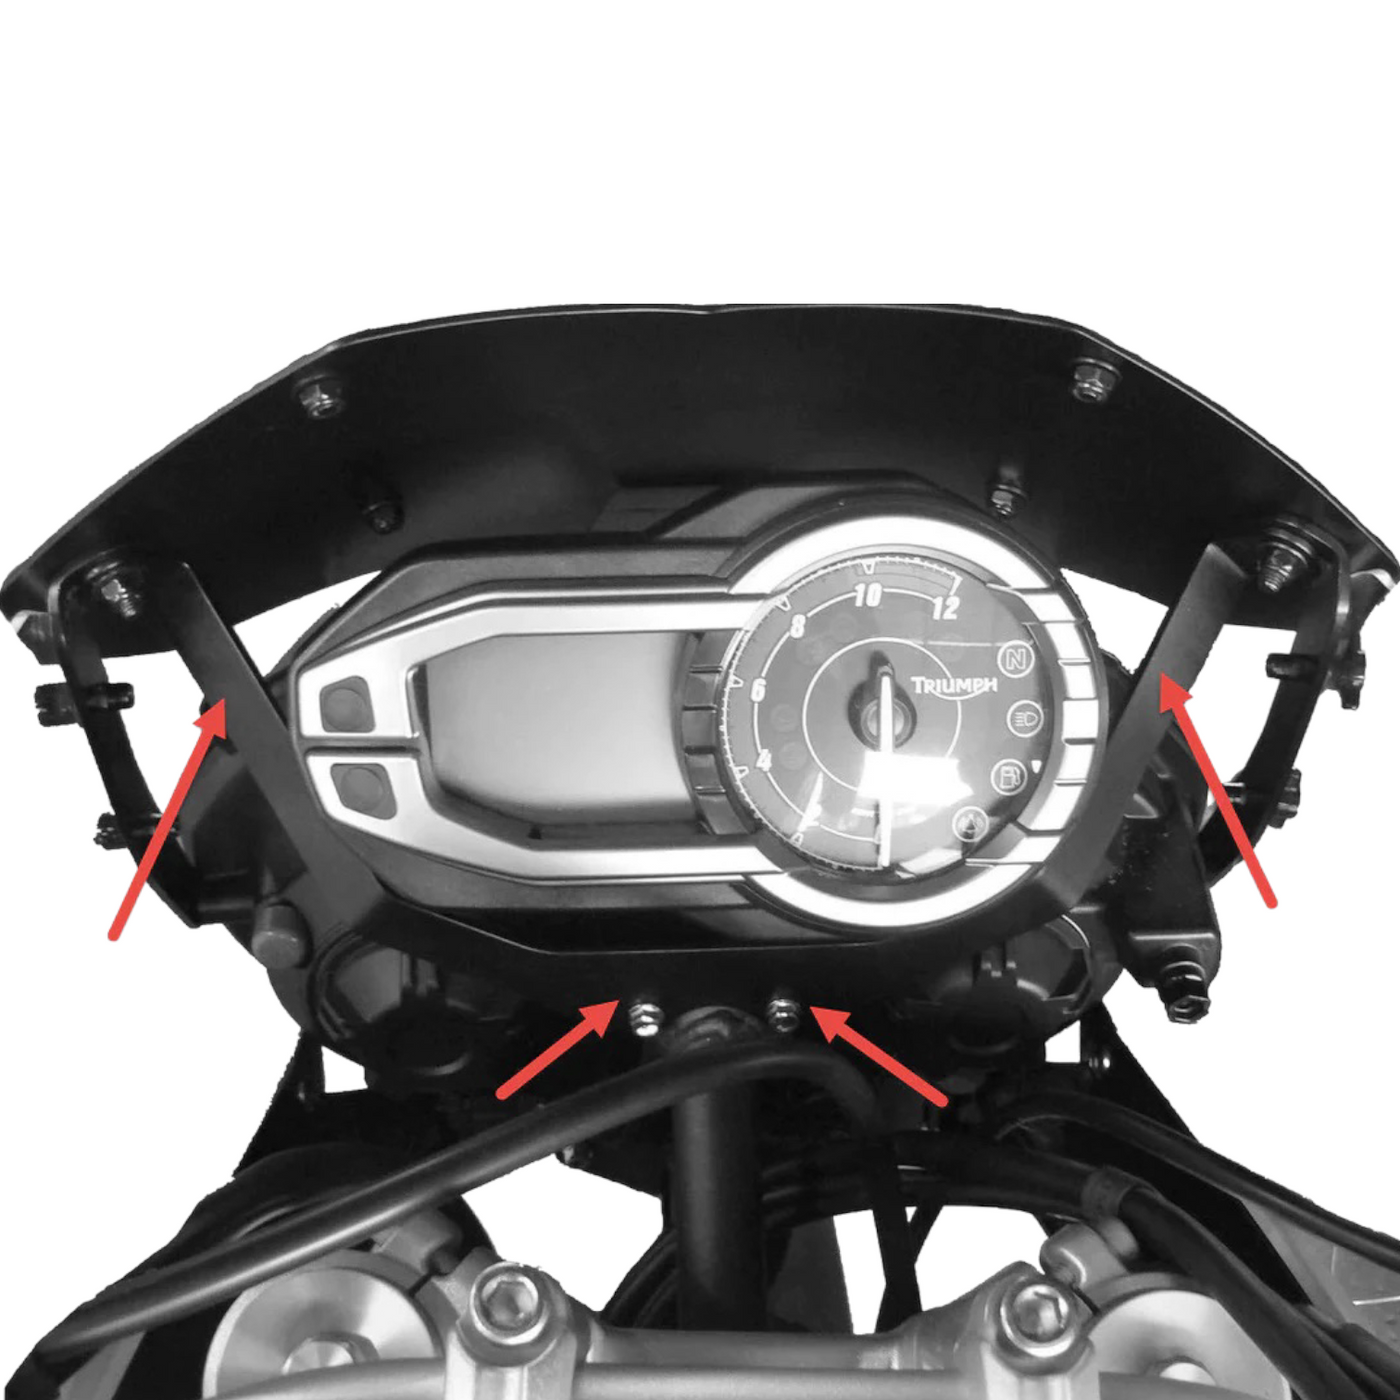 Rear Support Upgrade Kit for Tiger 800 (2011 - 2017)